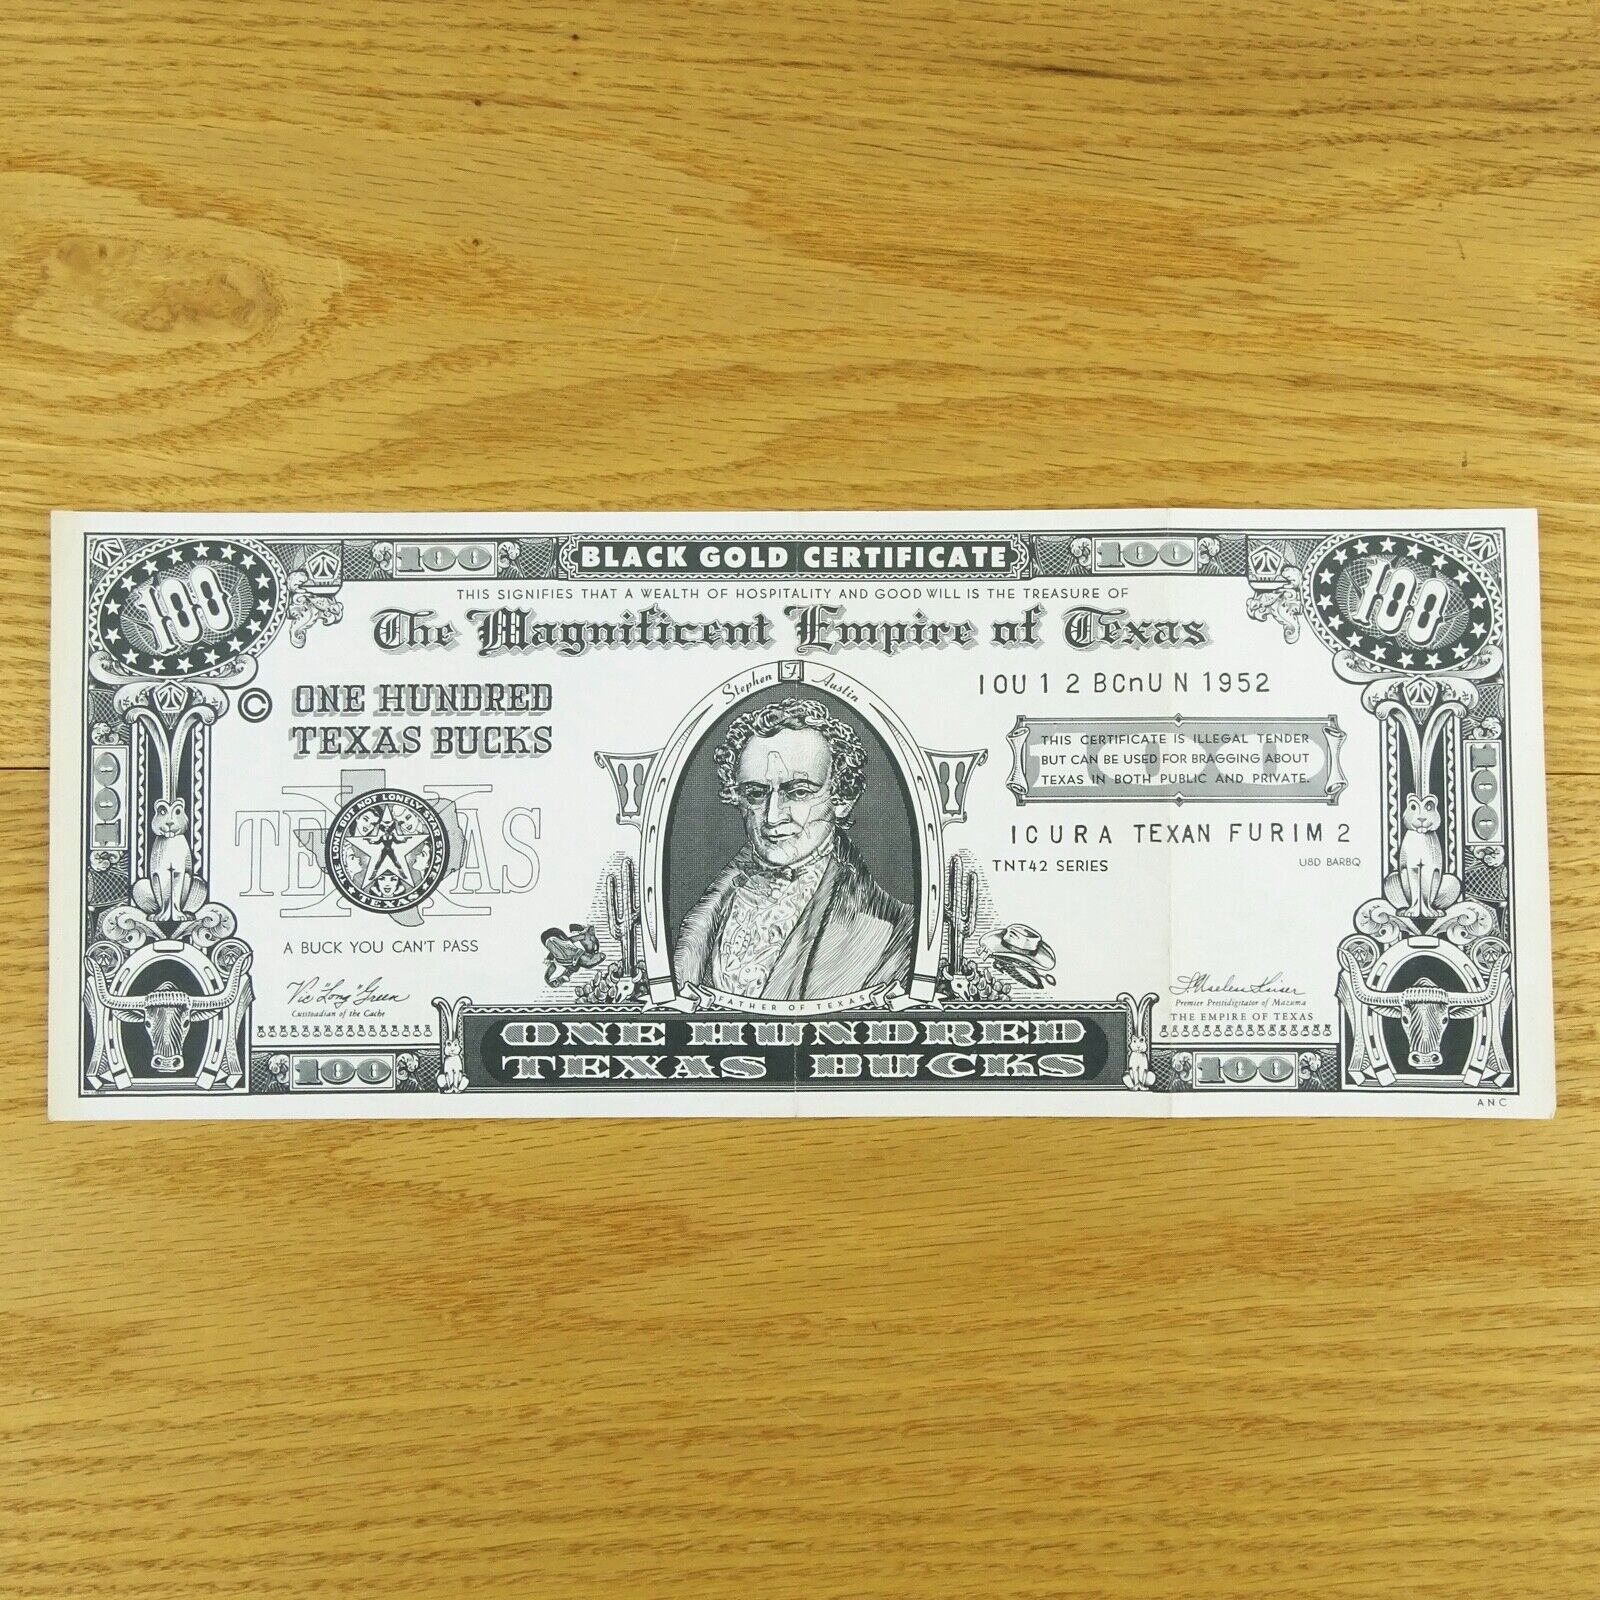 100 Texas Bucks Dollars Novelty Note Currency 1952 Texas Black Gold Certificate